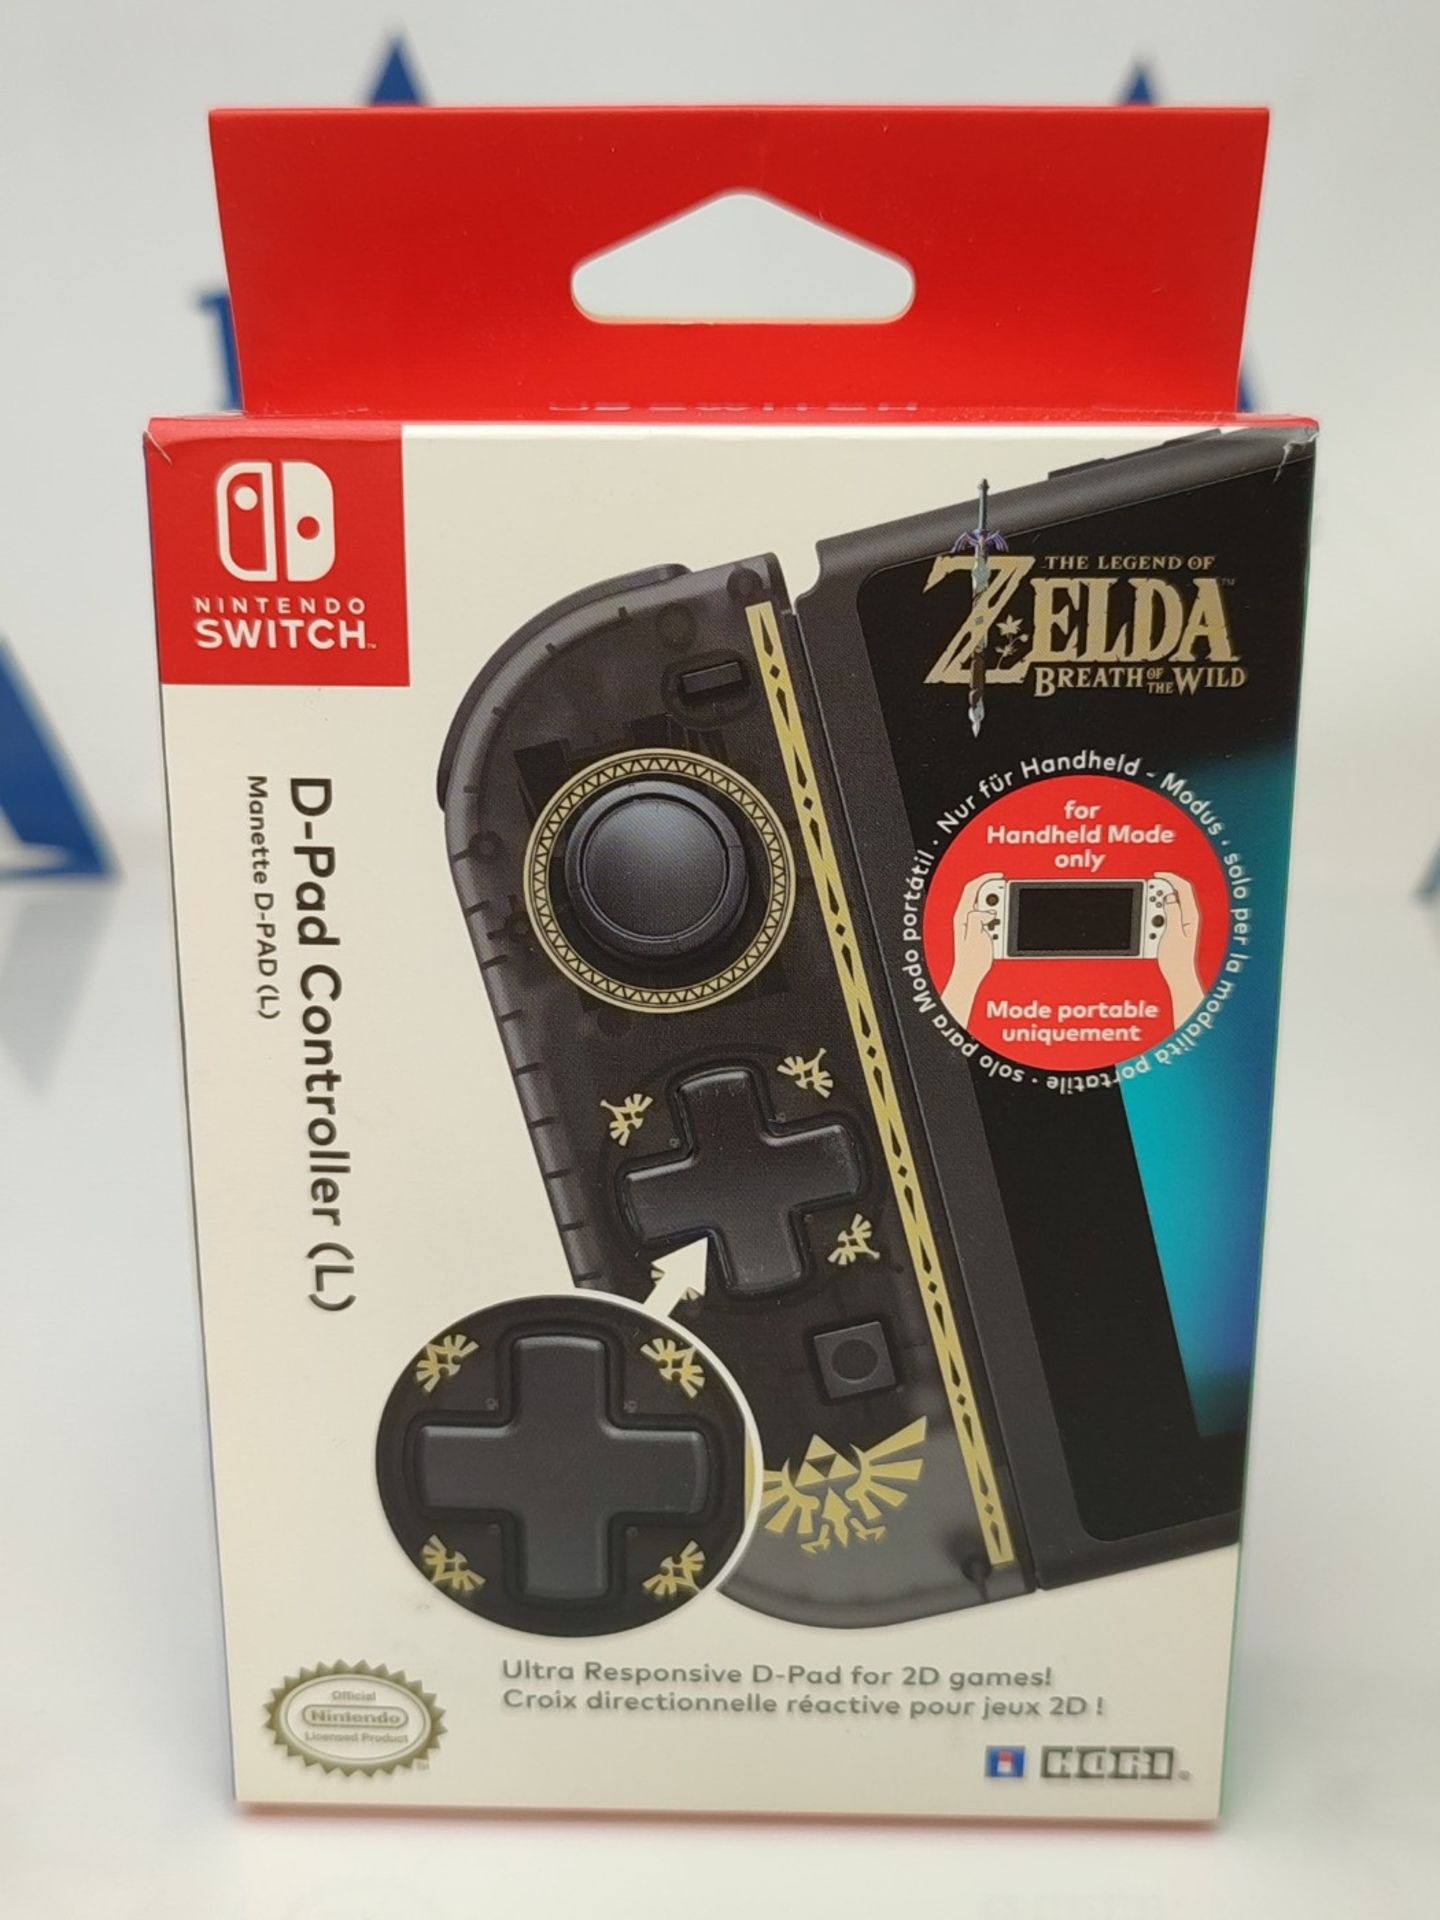 HORI - Left D-Pad Controller Zelda (Nintendo Switch) Only for "handheld mode". - Image 2 of 3